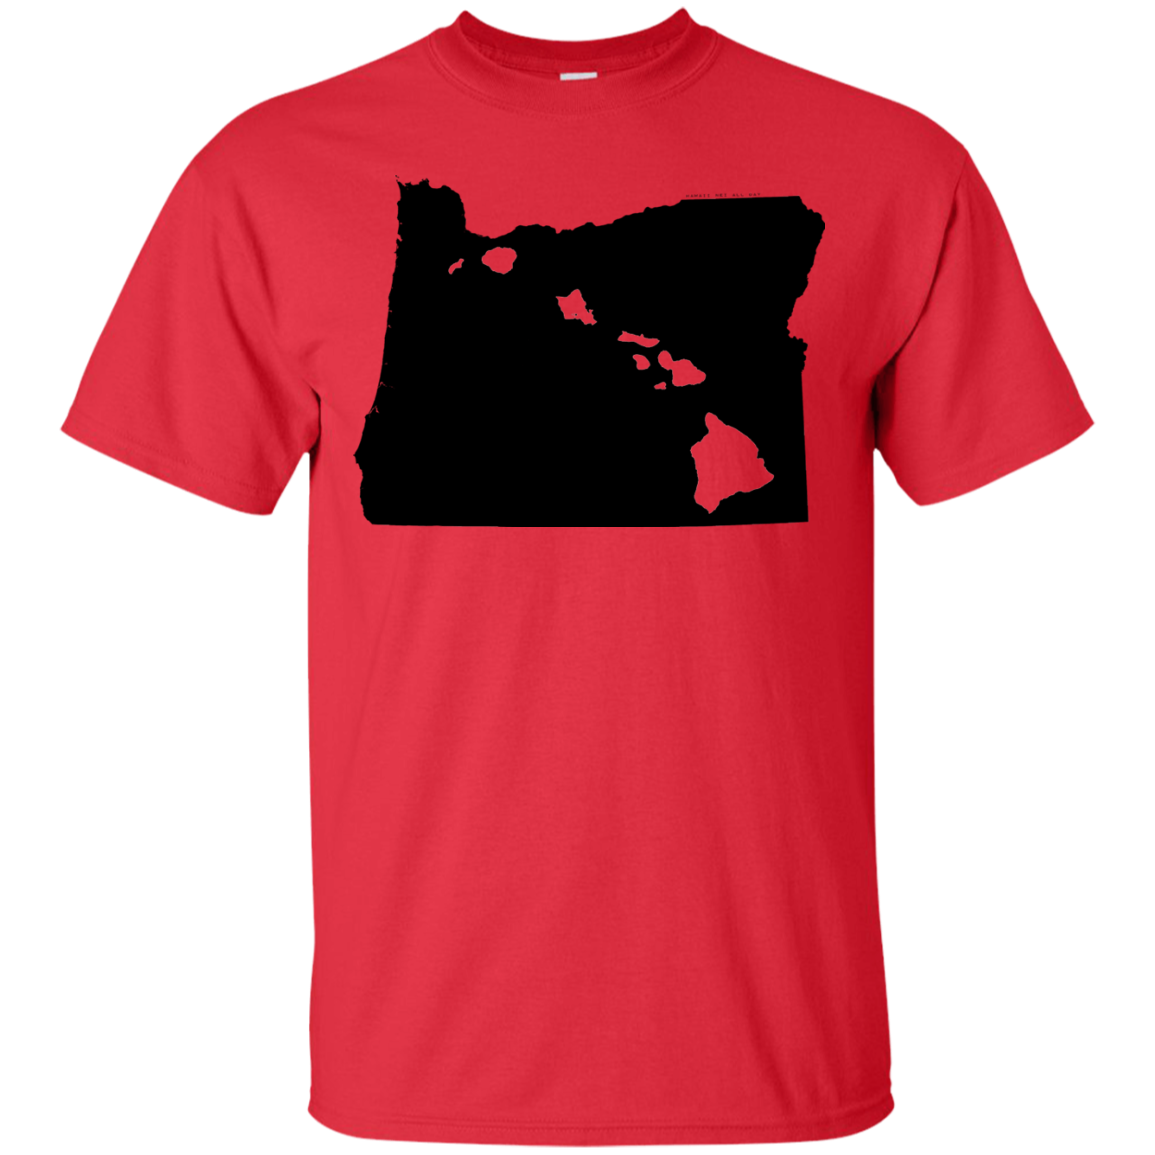 Living in Oregon with Hawaii Roots Ultra Cotton T-Shirt, T-Shirts, Hawaii Nei All Day